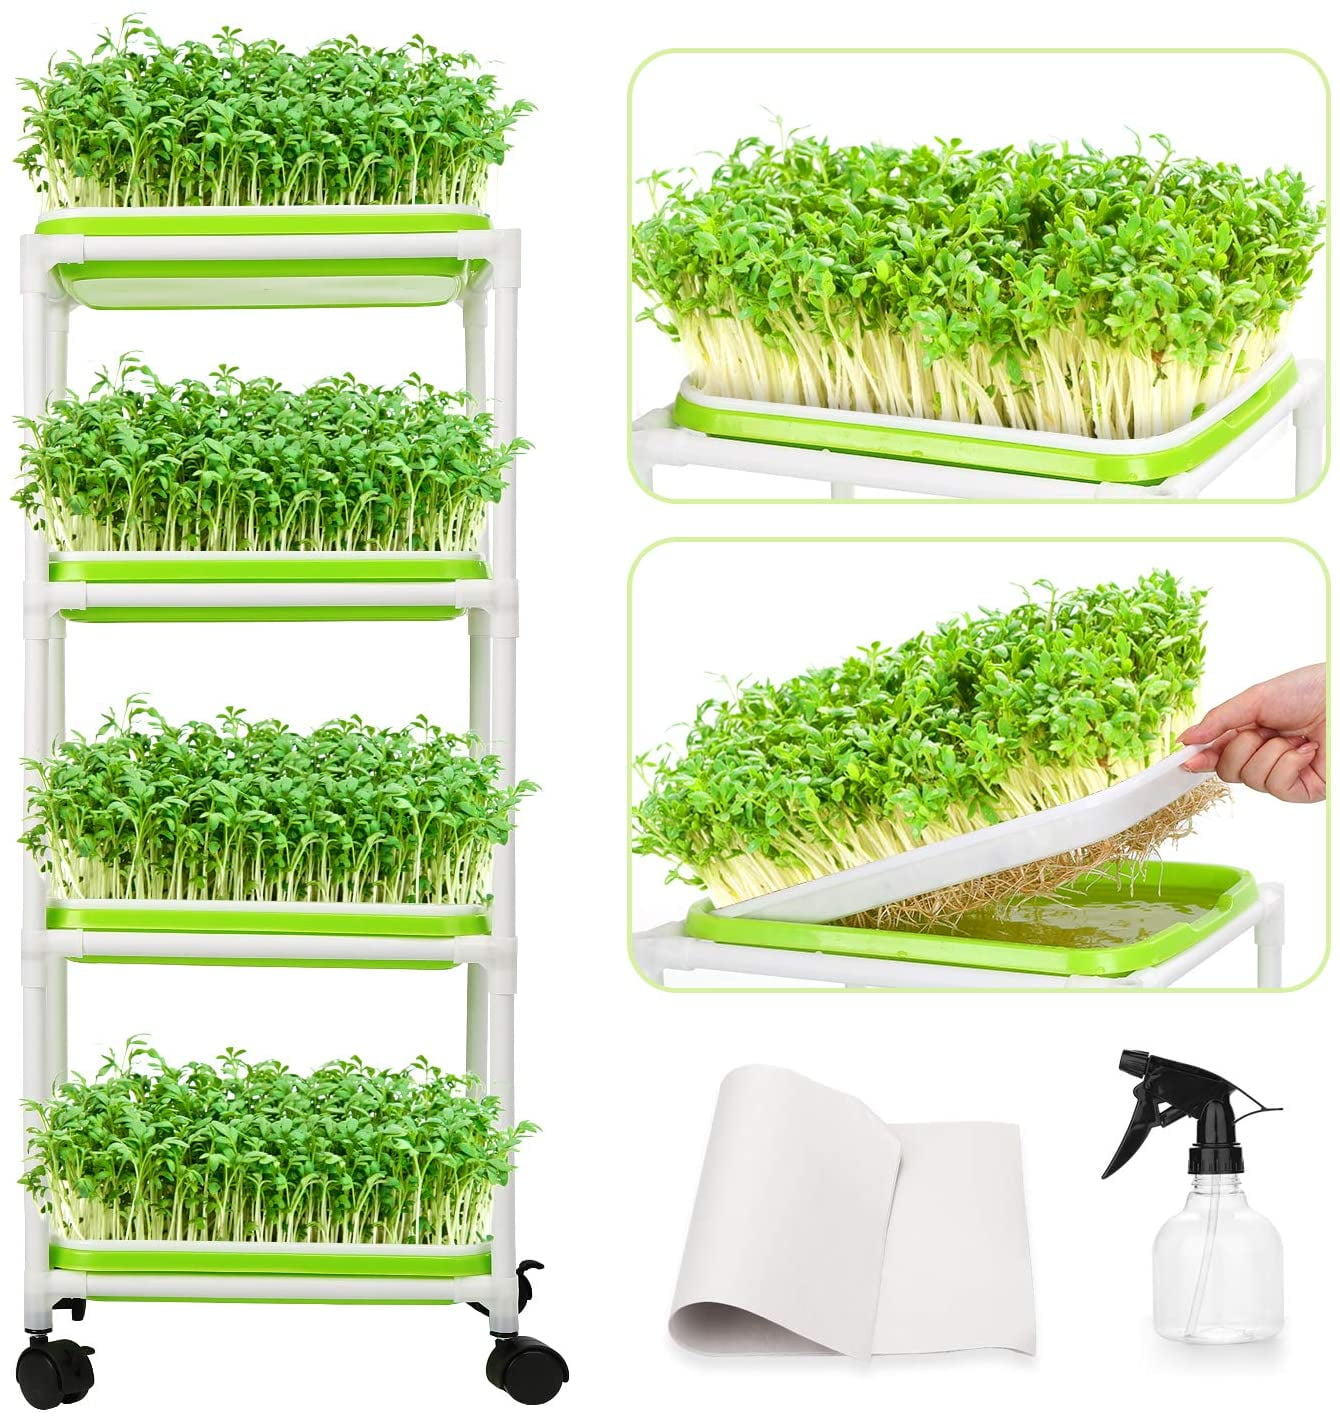 Seed Sprouter Tray Soil-Free Big Capacity Germination Grass Grow Box Plant 